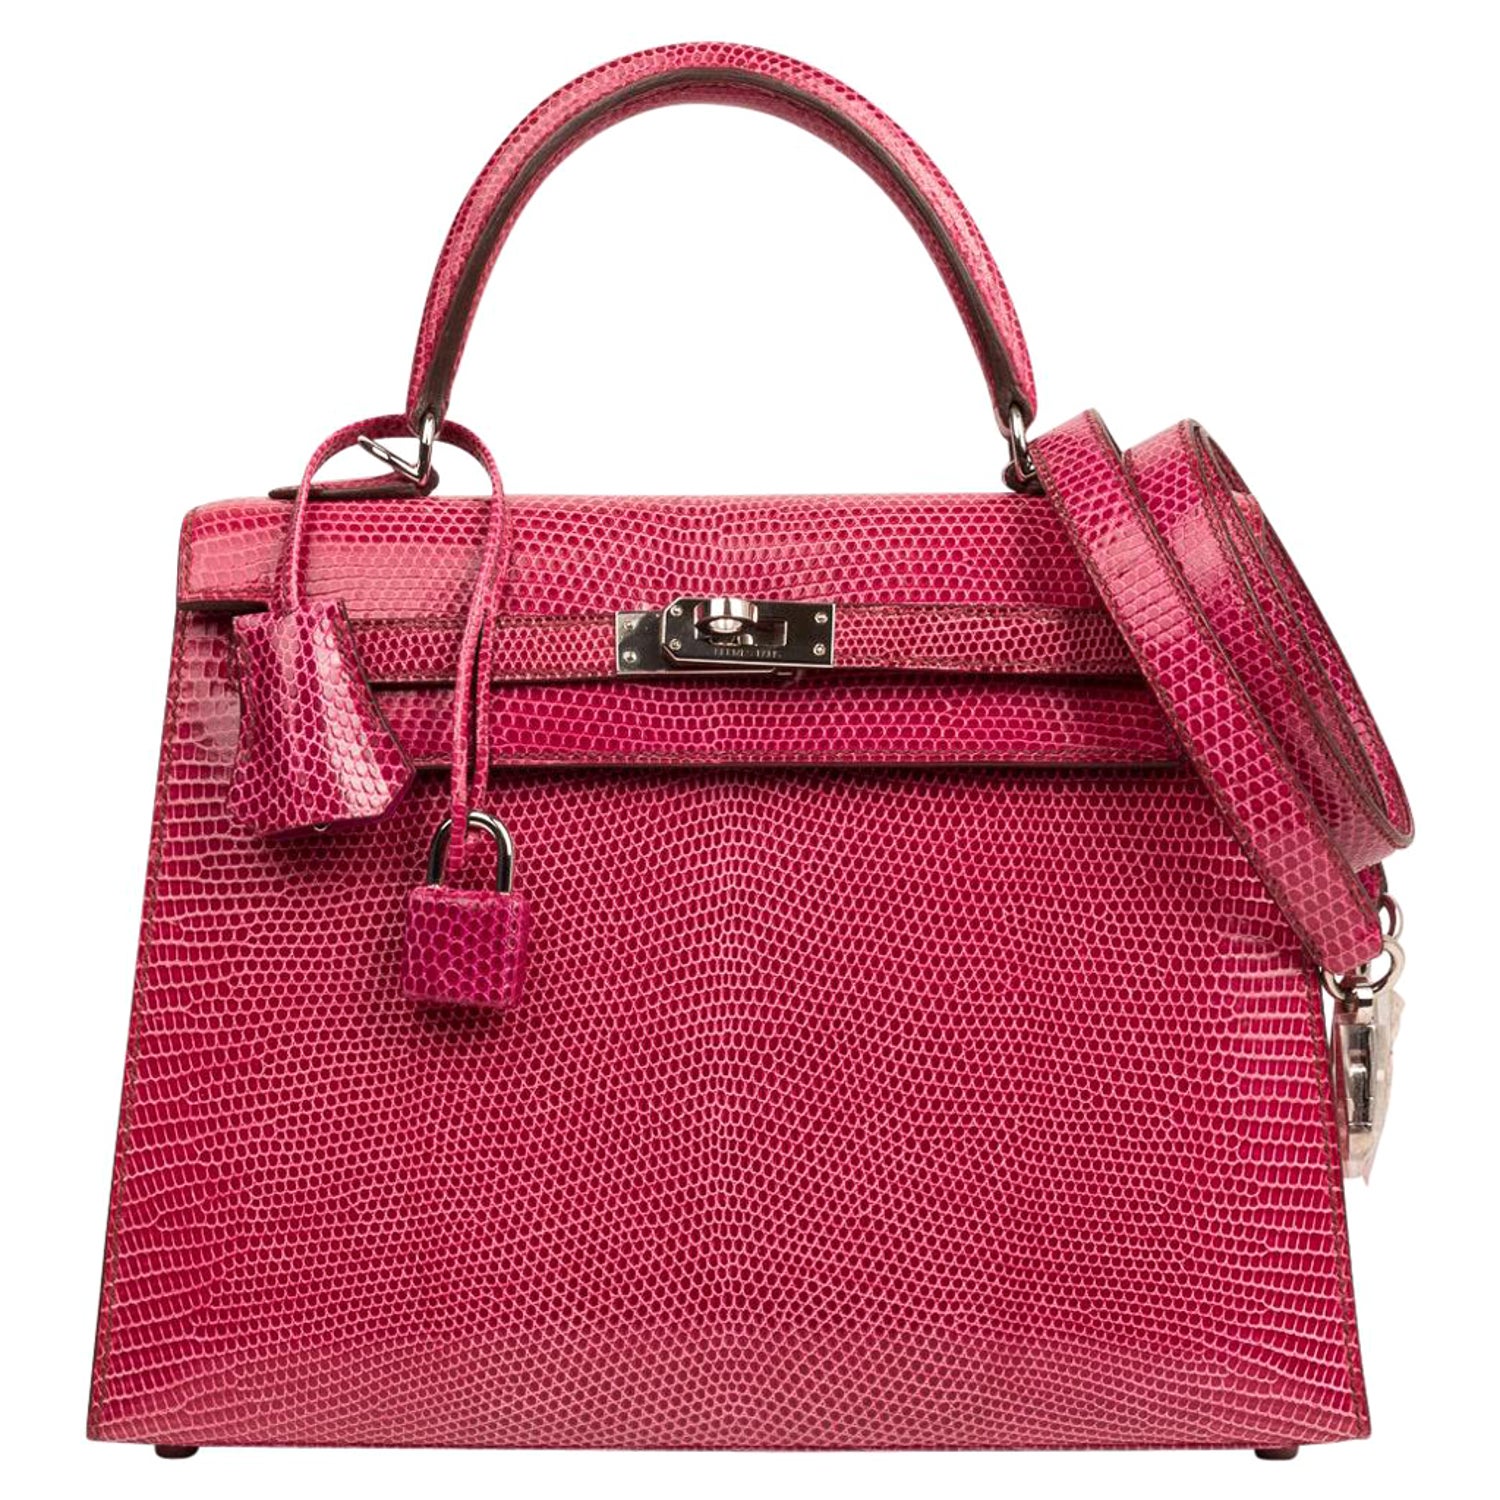 Hermes Kelly 25 Rose Lipstick PInk Chevre Limited Edition Sellier